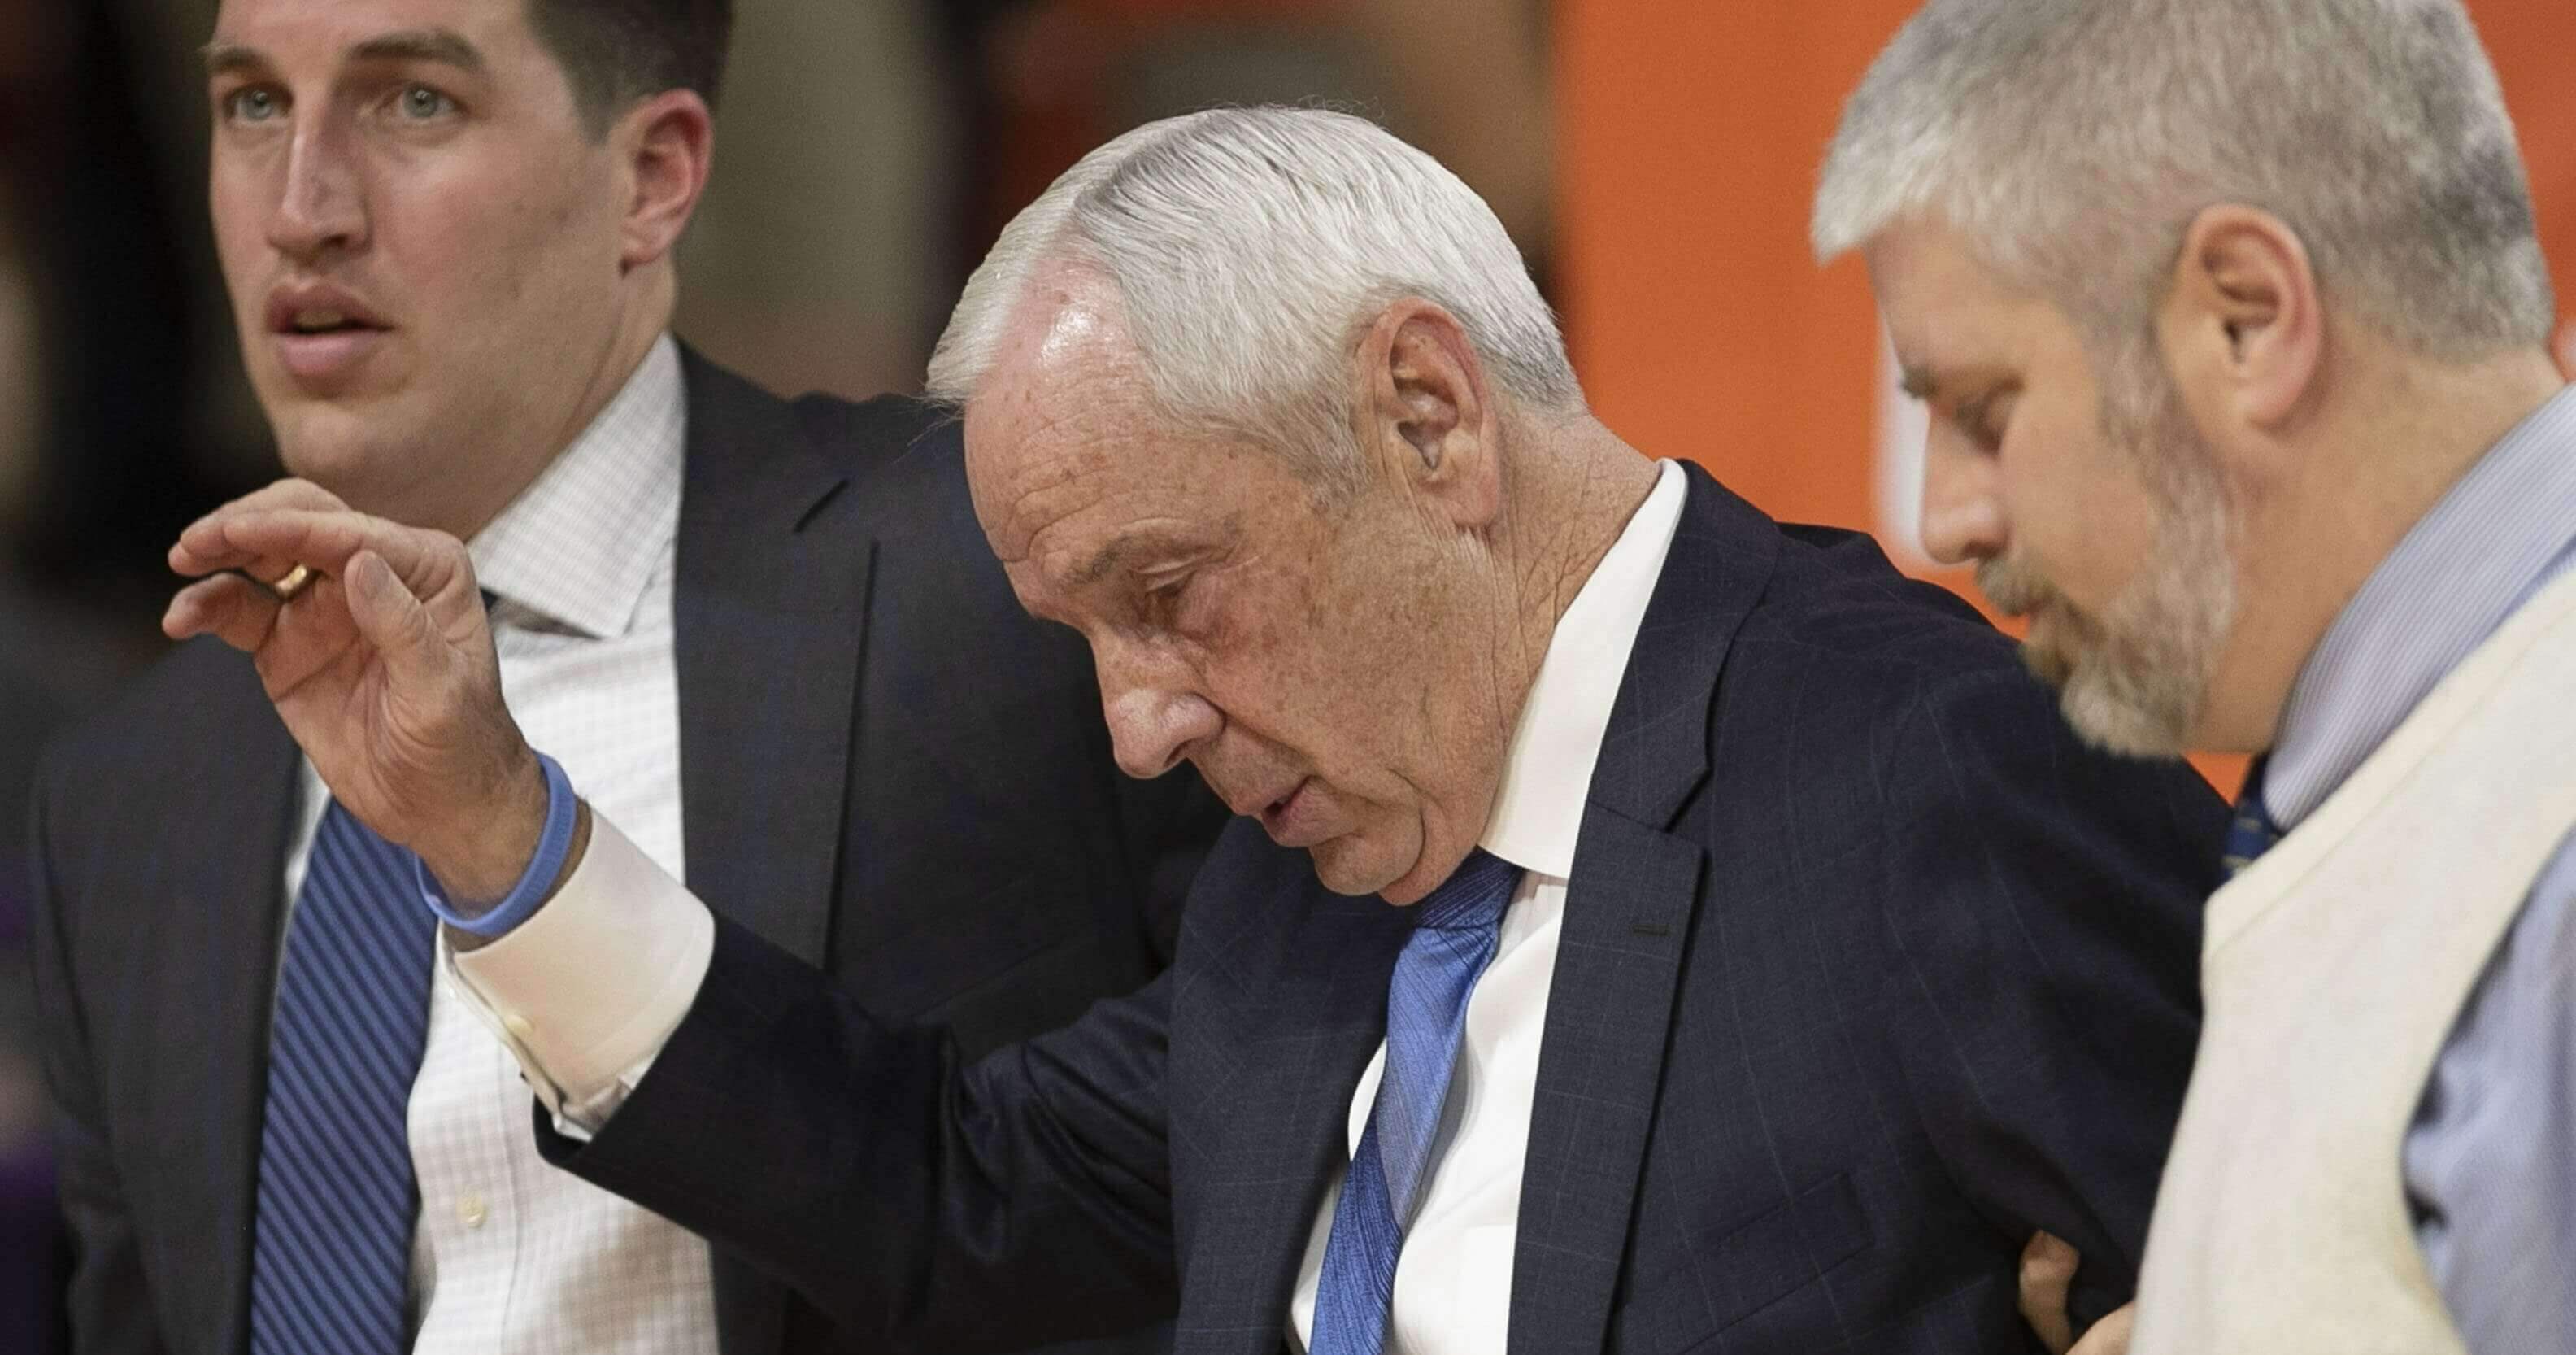 North Carolina coach Roy Williams is escorted off the court and waves, after falling near the bench during the first half of the team's NCAA college basketball game against Clemson on Saturday, Mar. 2, 2019, in Clemson, S.C.